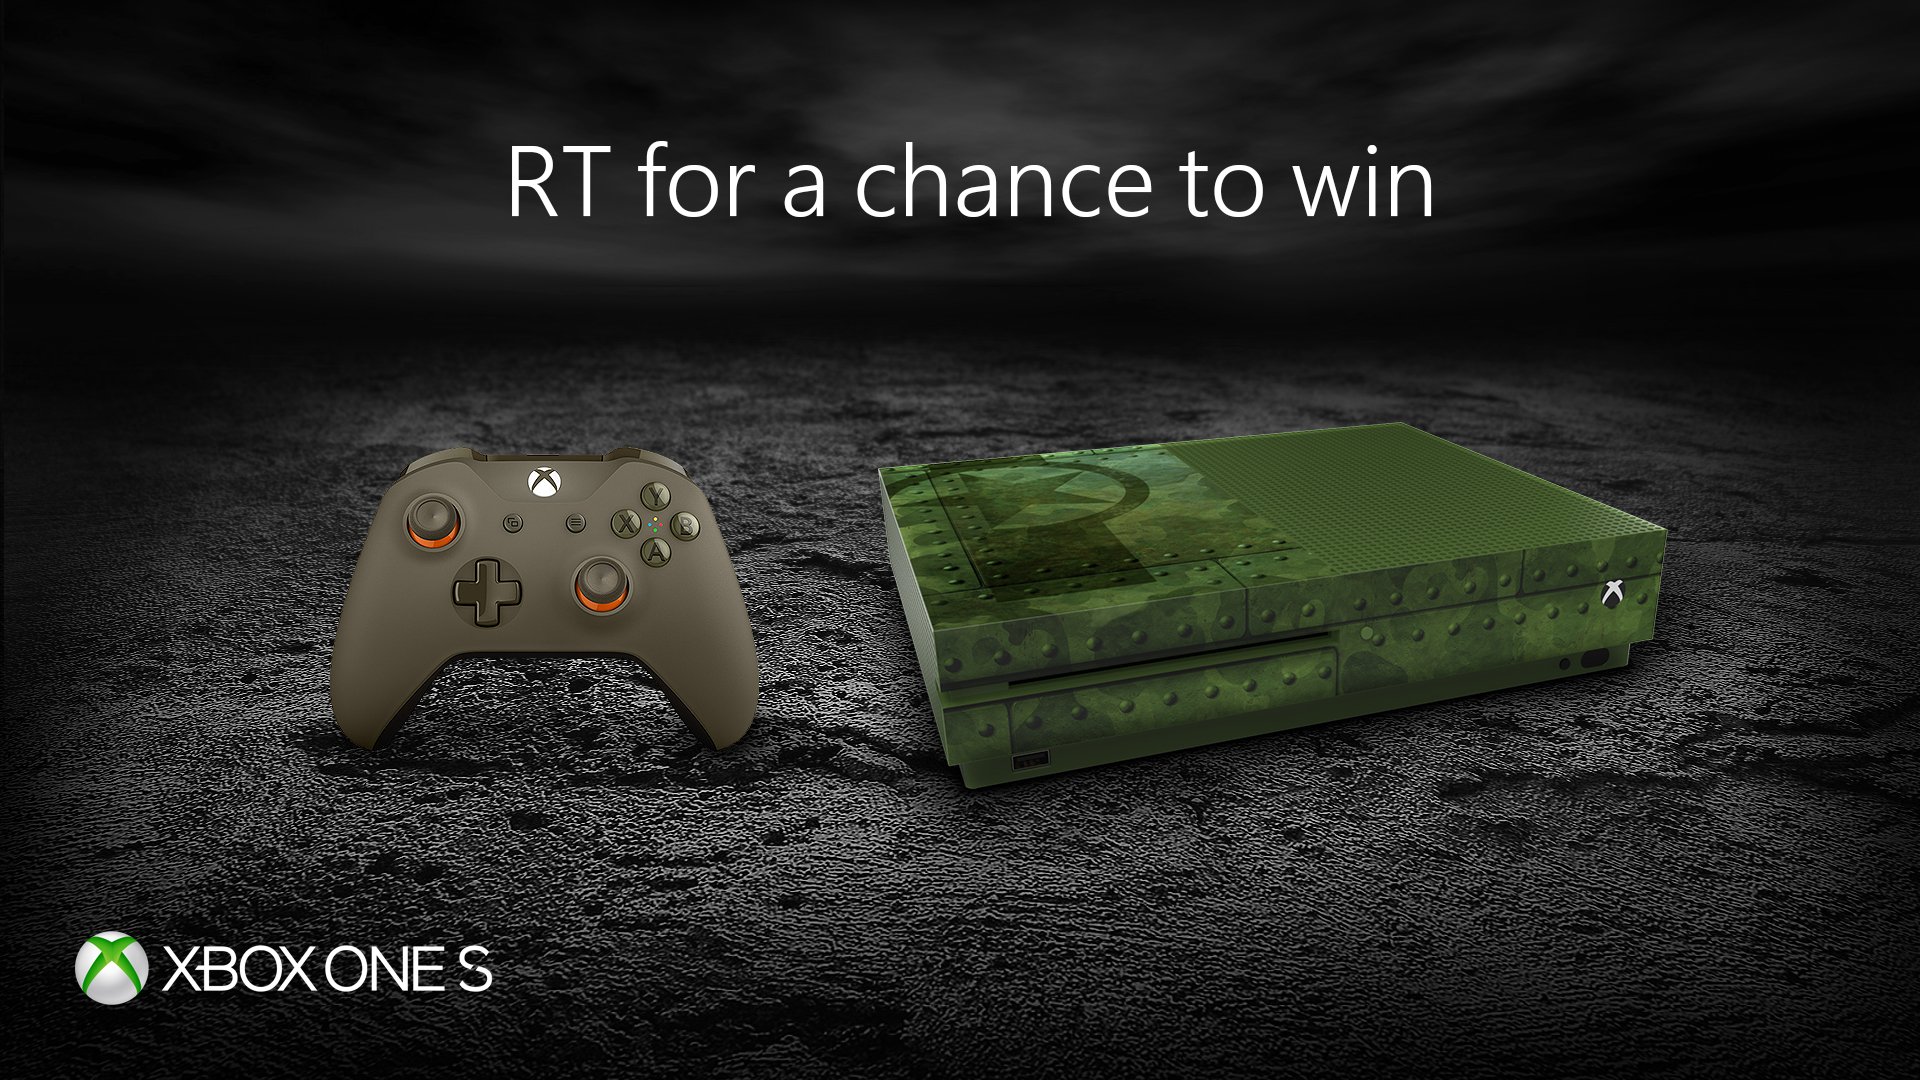 Xbox on X: "RT for a chance to win a #XboxOneS and more. NoPurchNec. Ends 11/7/17. #XboxSweepstakes rules: https://t.co/g1Sb79XnT4 https://t.co/iSZ4azXpPk" / X